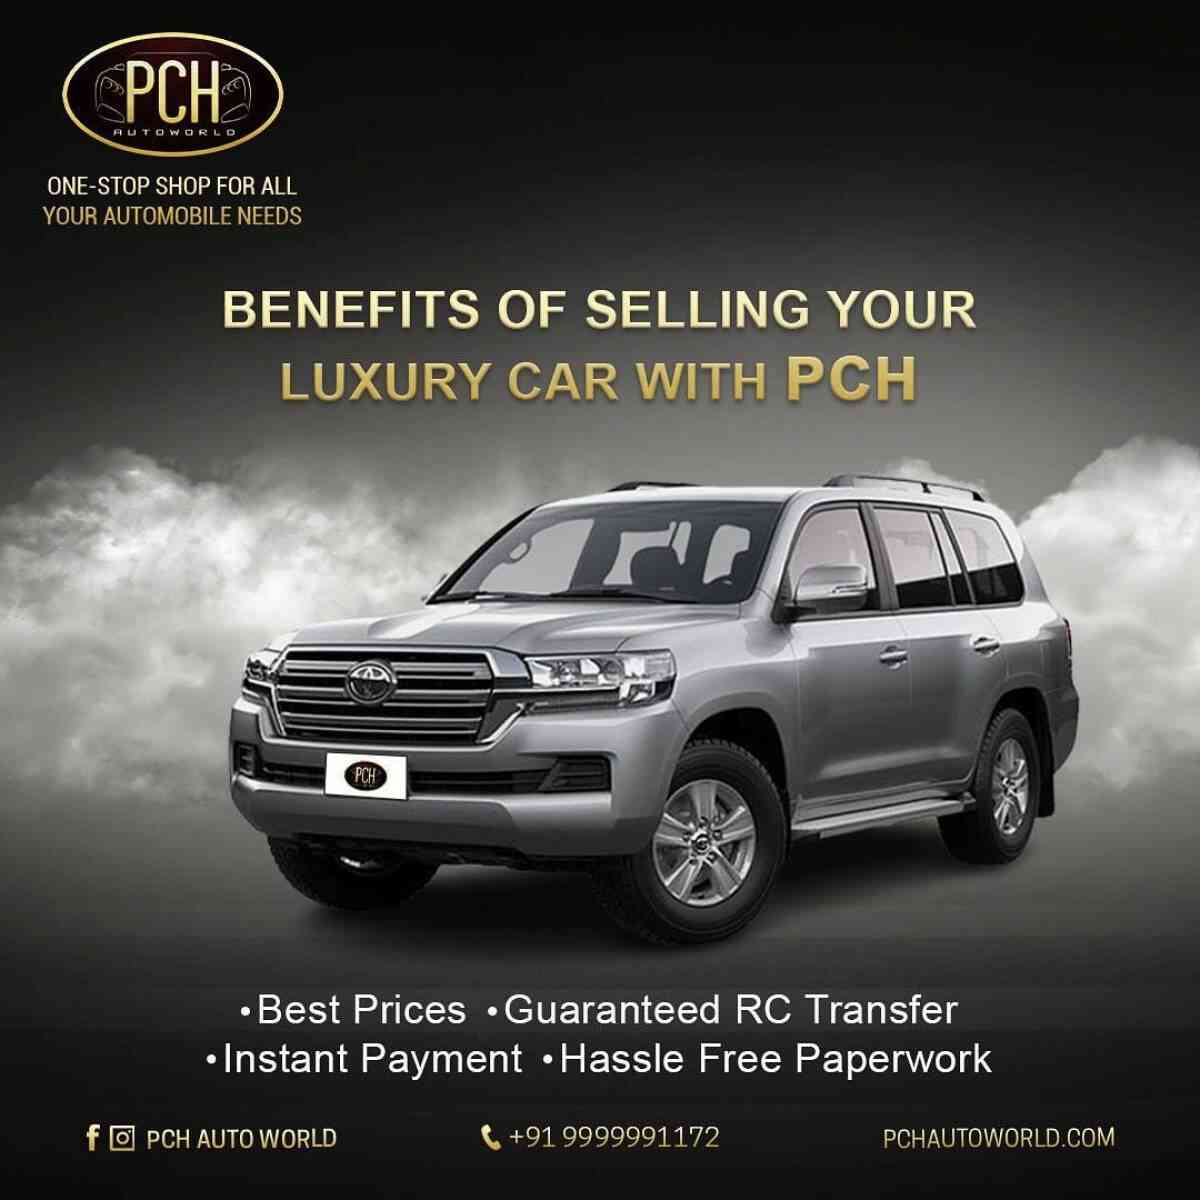 PCH Autoworld: A house of pre-owned luxury cars, second hand used luxury premium cars in Gurgaon,Delhi NCR, Mumbai and India